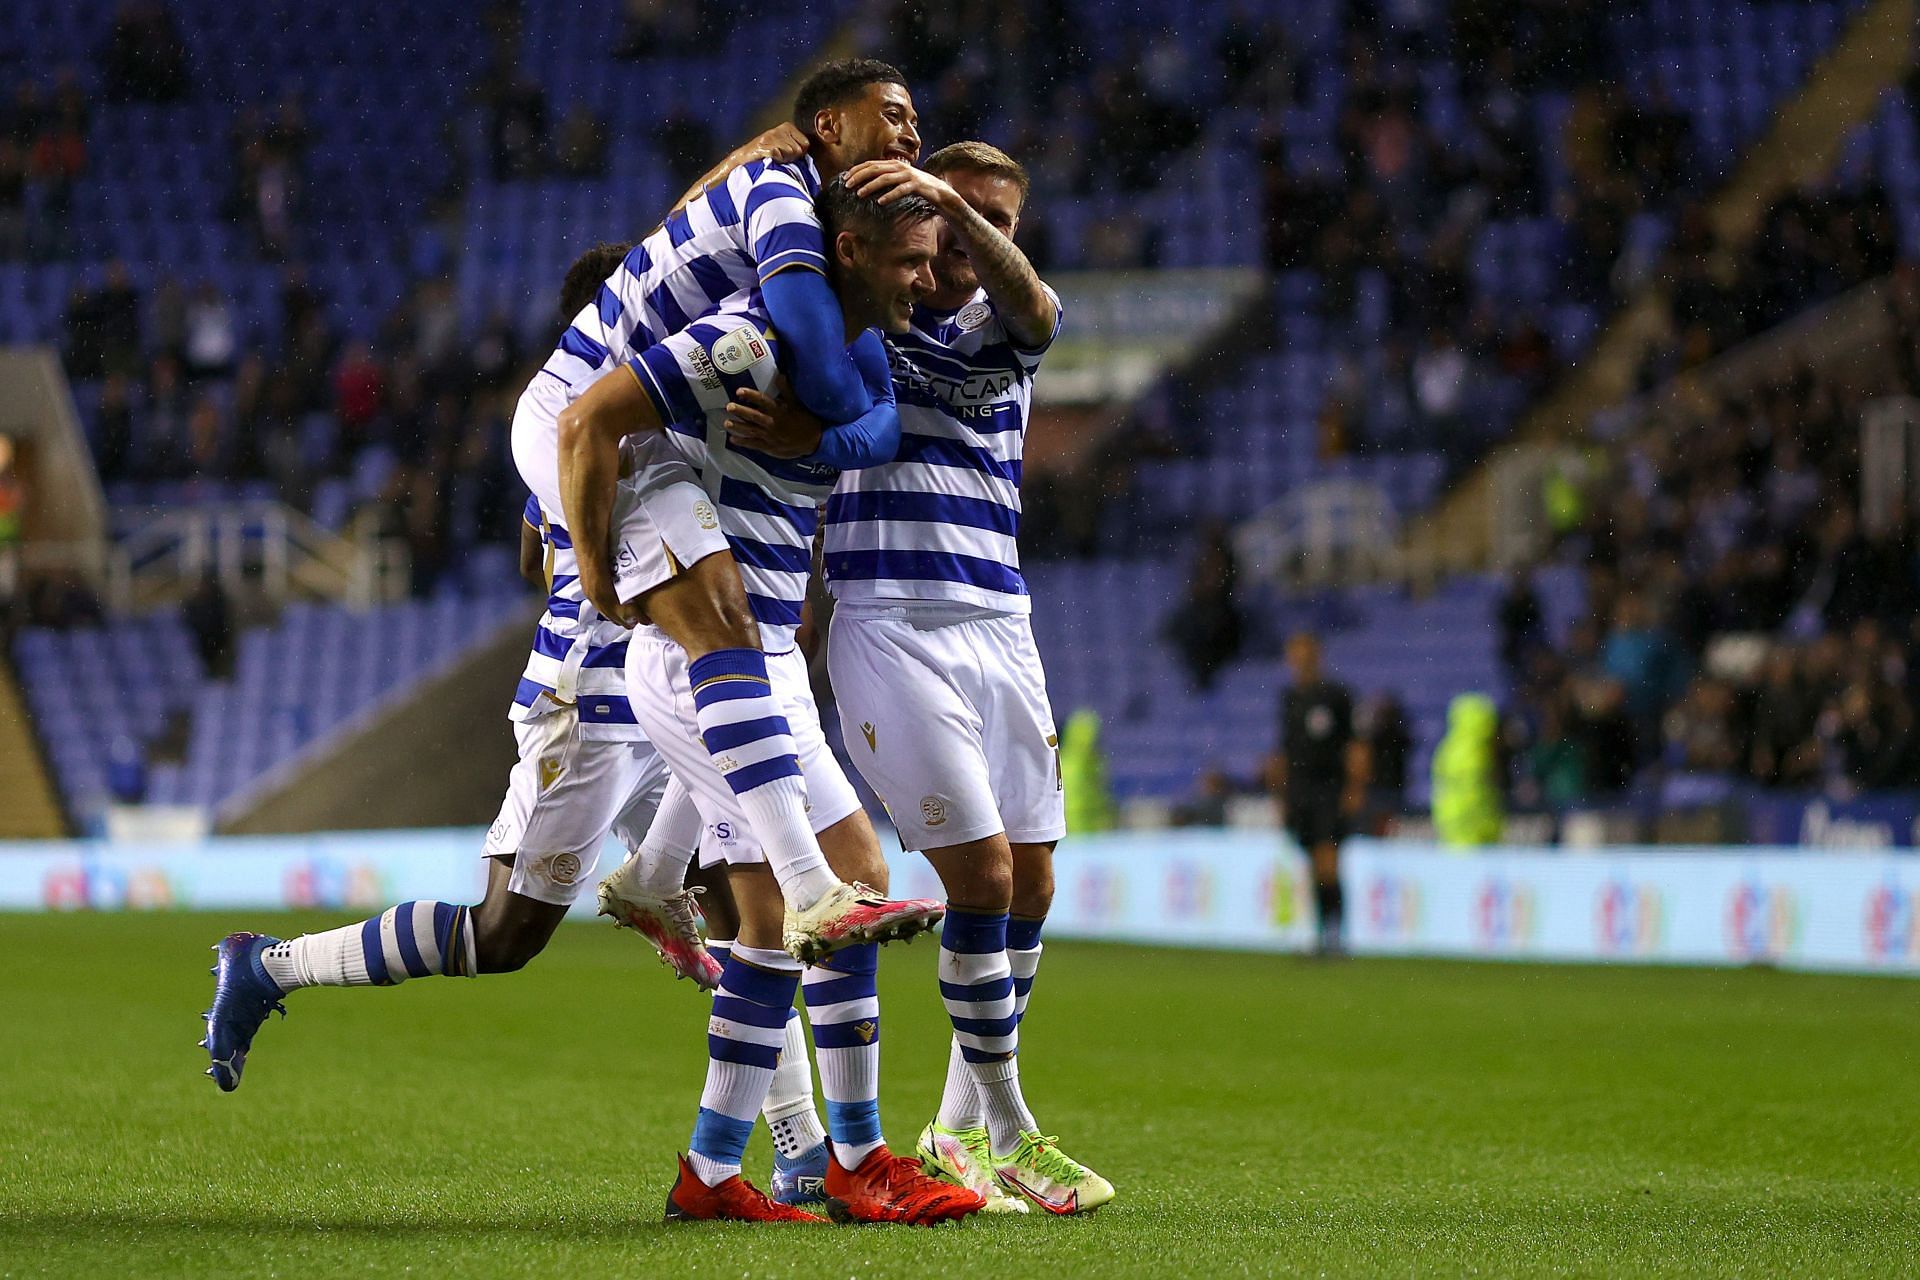 Reading and Nottingham Forest will battle for three points on Saturday